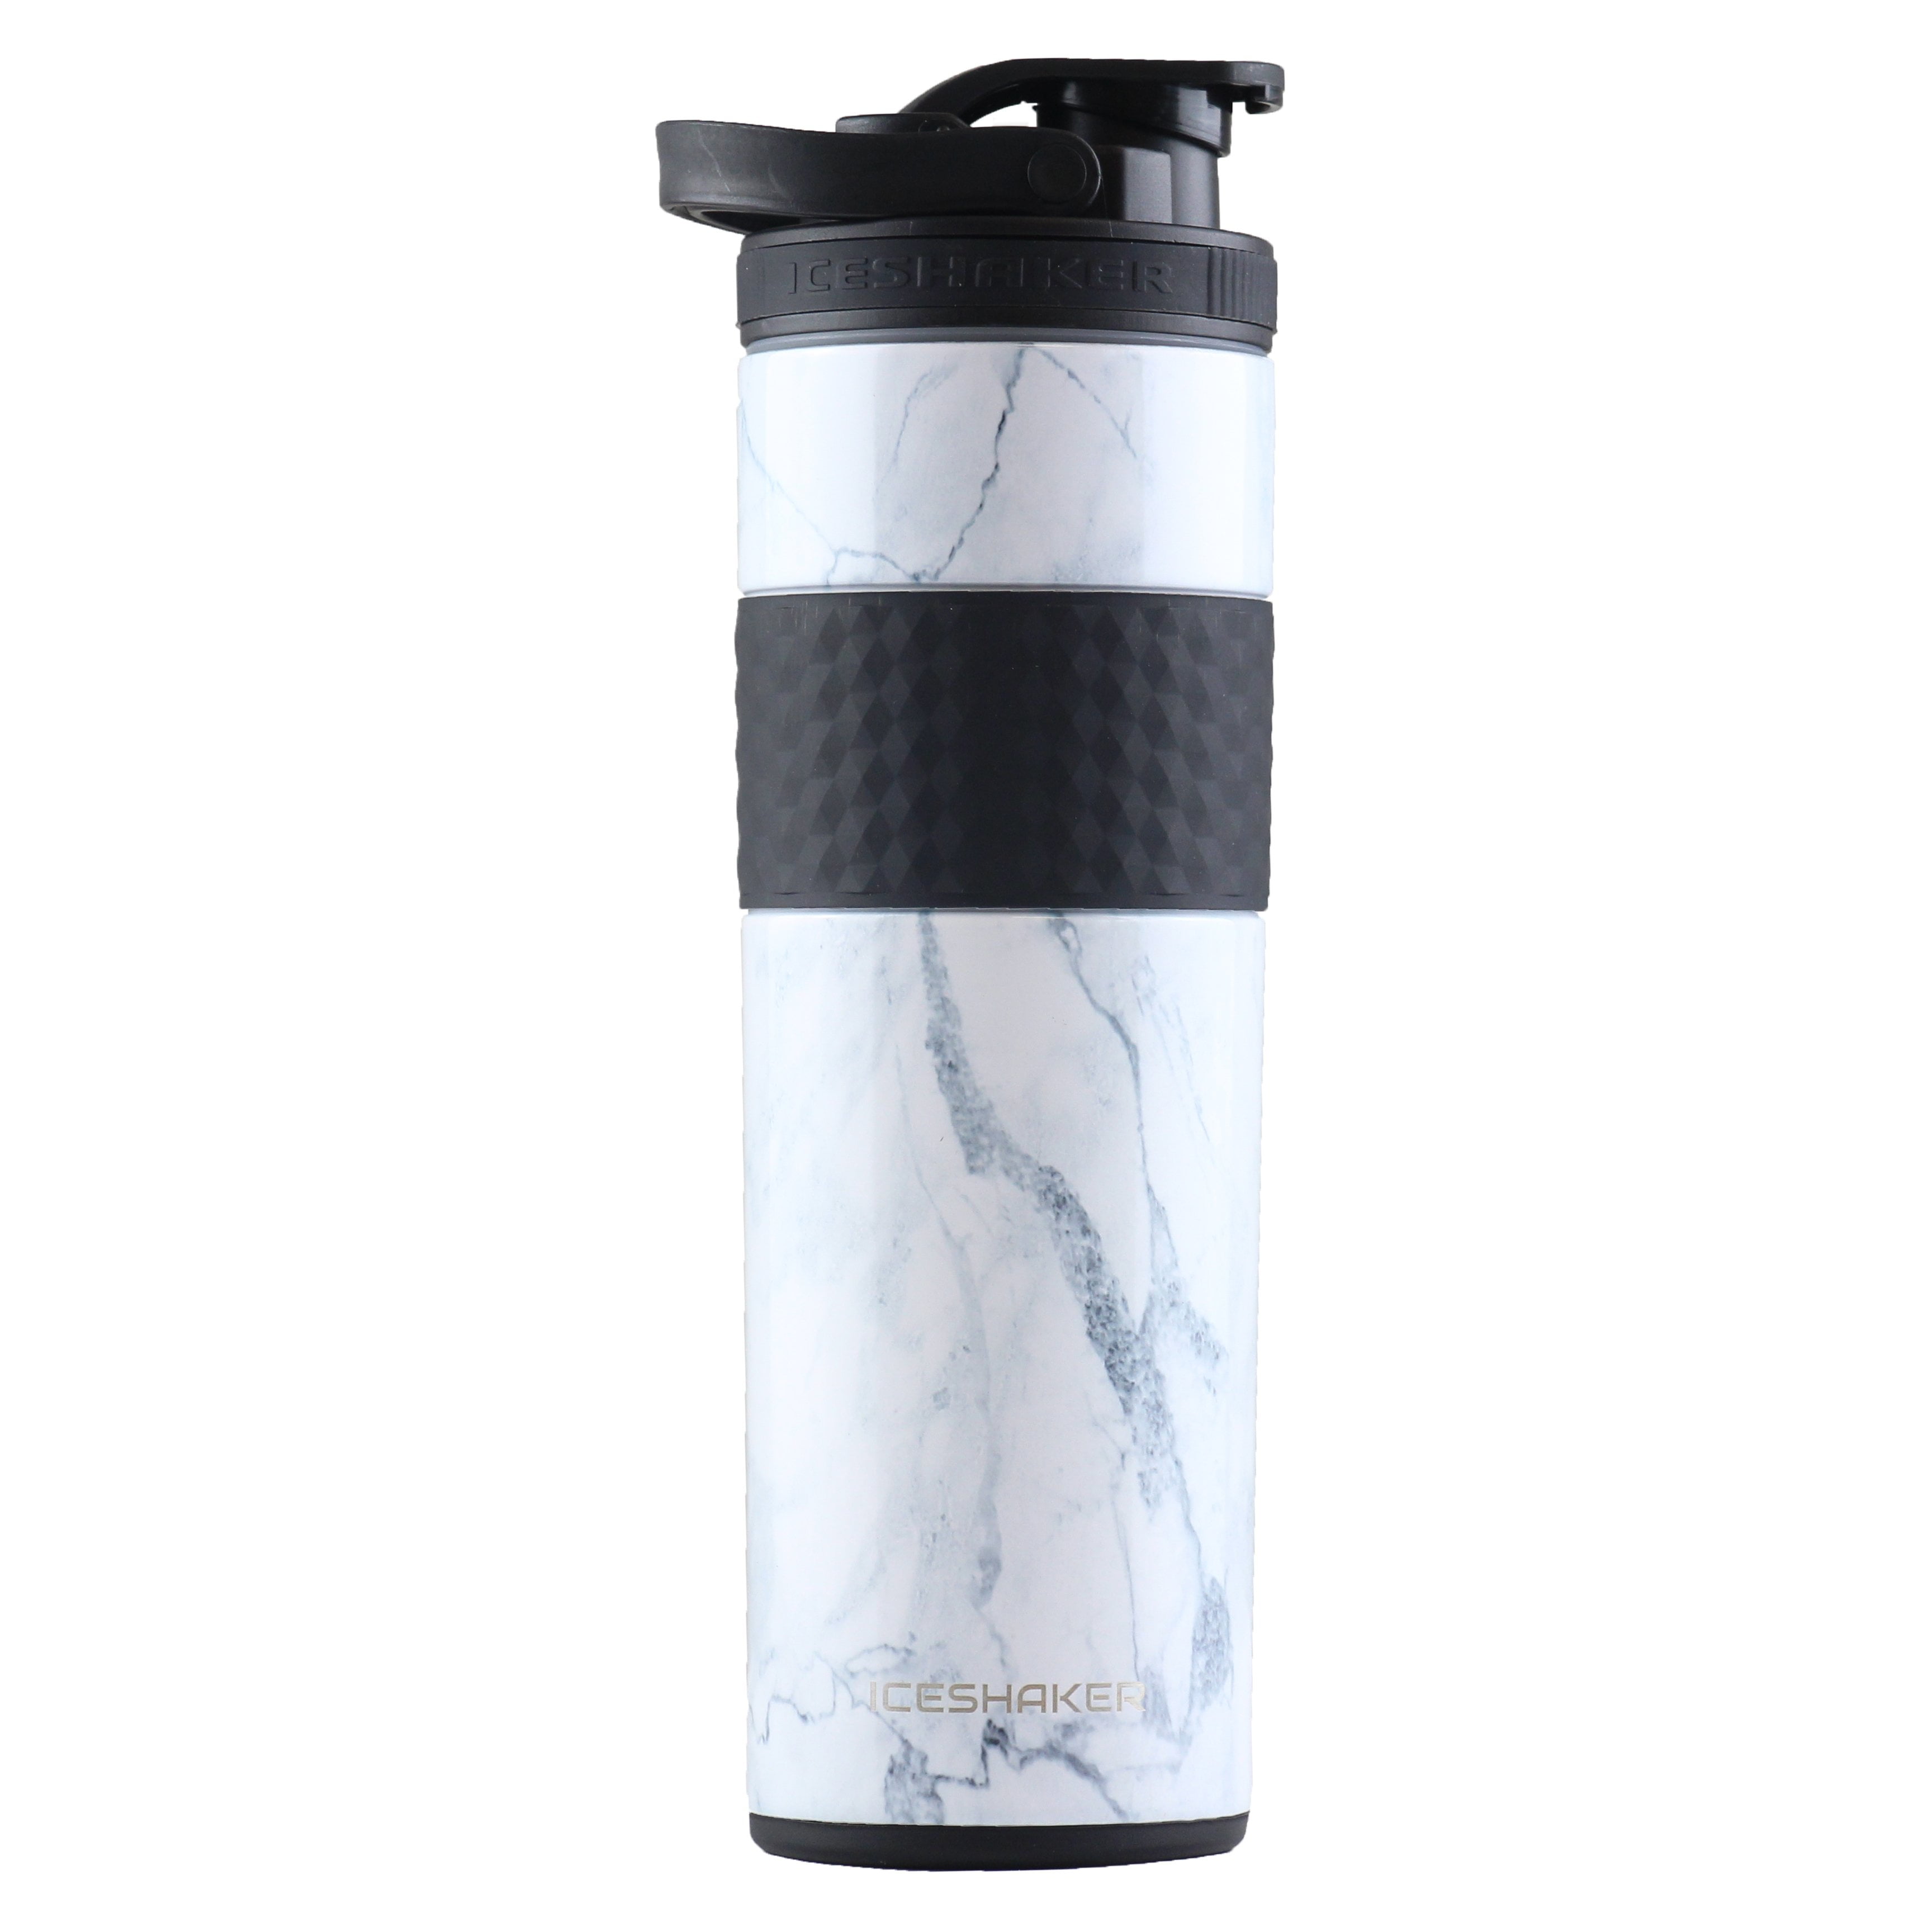 Vacuum Insulated Cocktail Shaker - Premium 20oz Double Wall Vacuum  Insulated Stainless Steel Shaker Bottle With Straw, Shatter-Proof Top and  Push-Pull